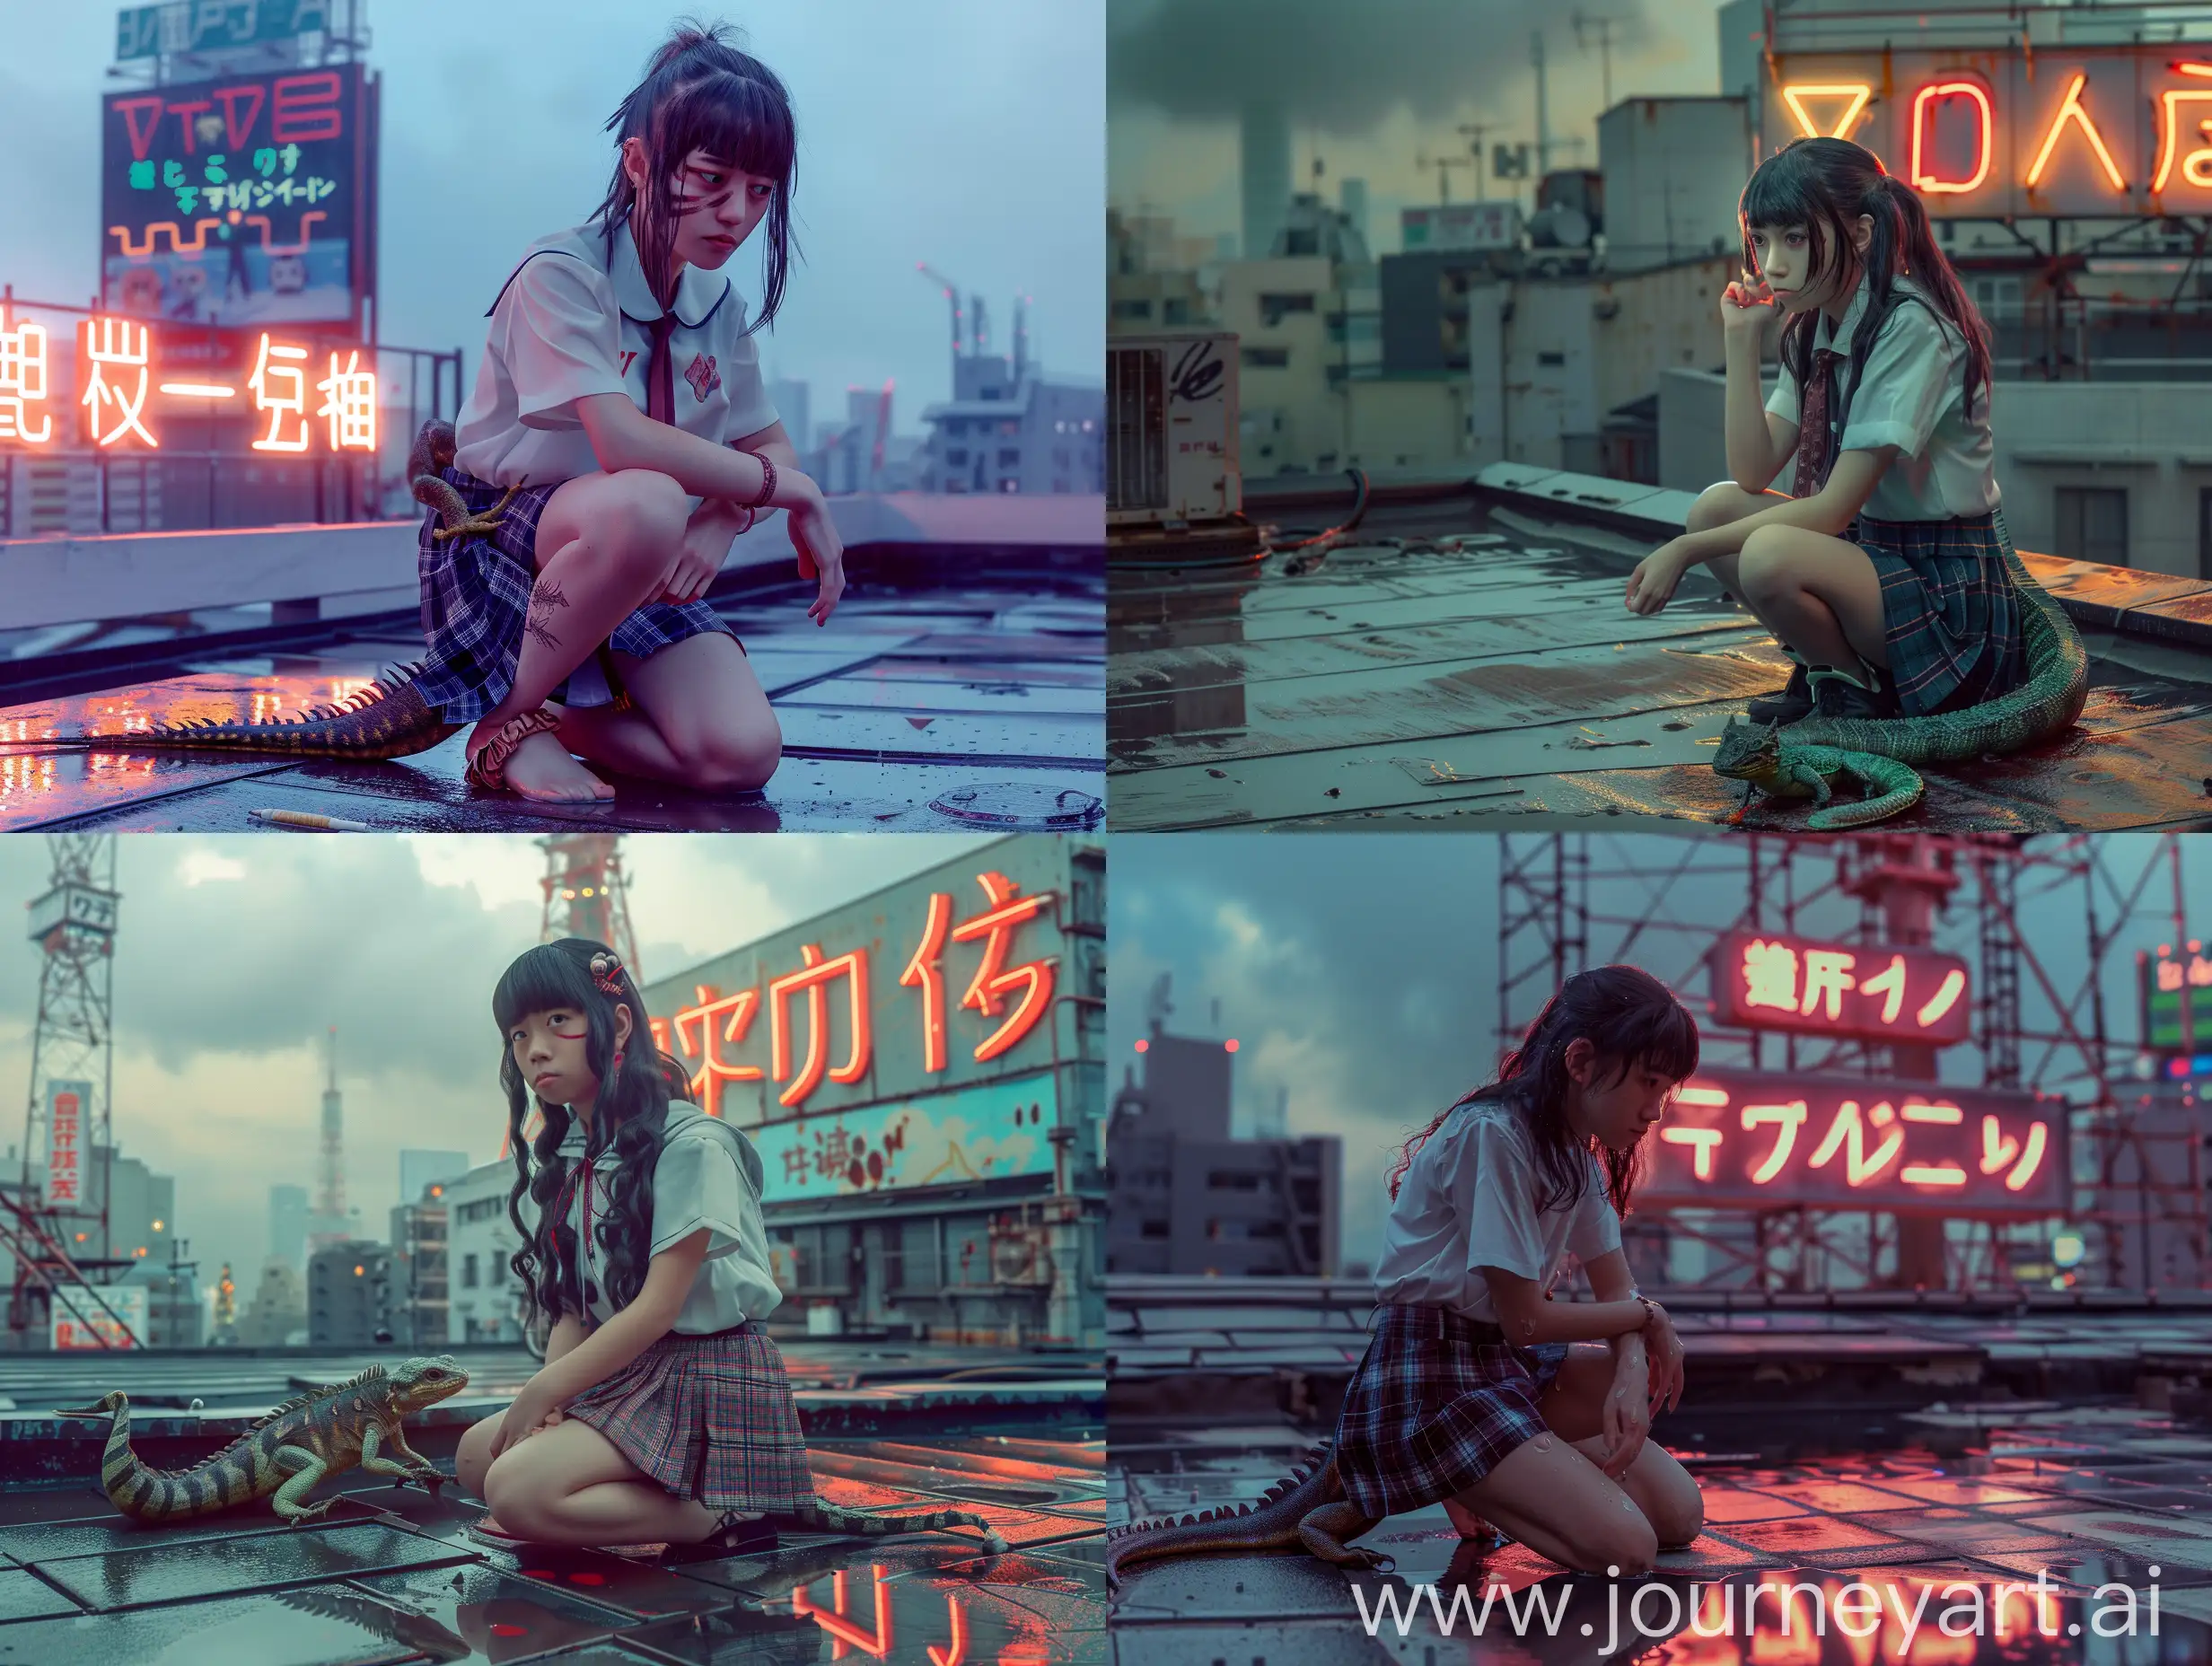 Japanese-Yokai-Girl-Contemplating-on-Tokyo-Rooftop-with-Neon-Signboard